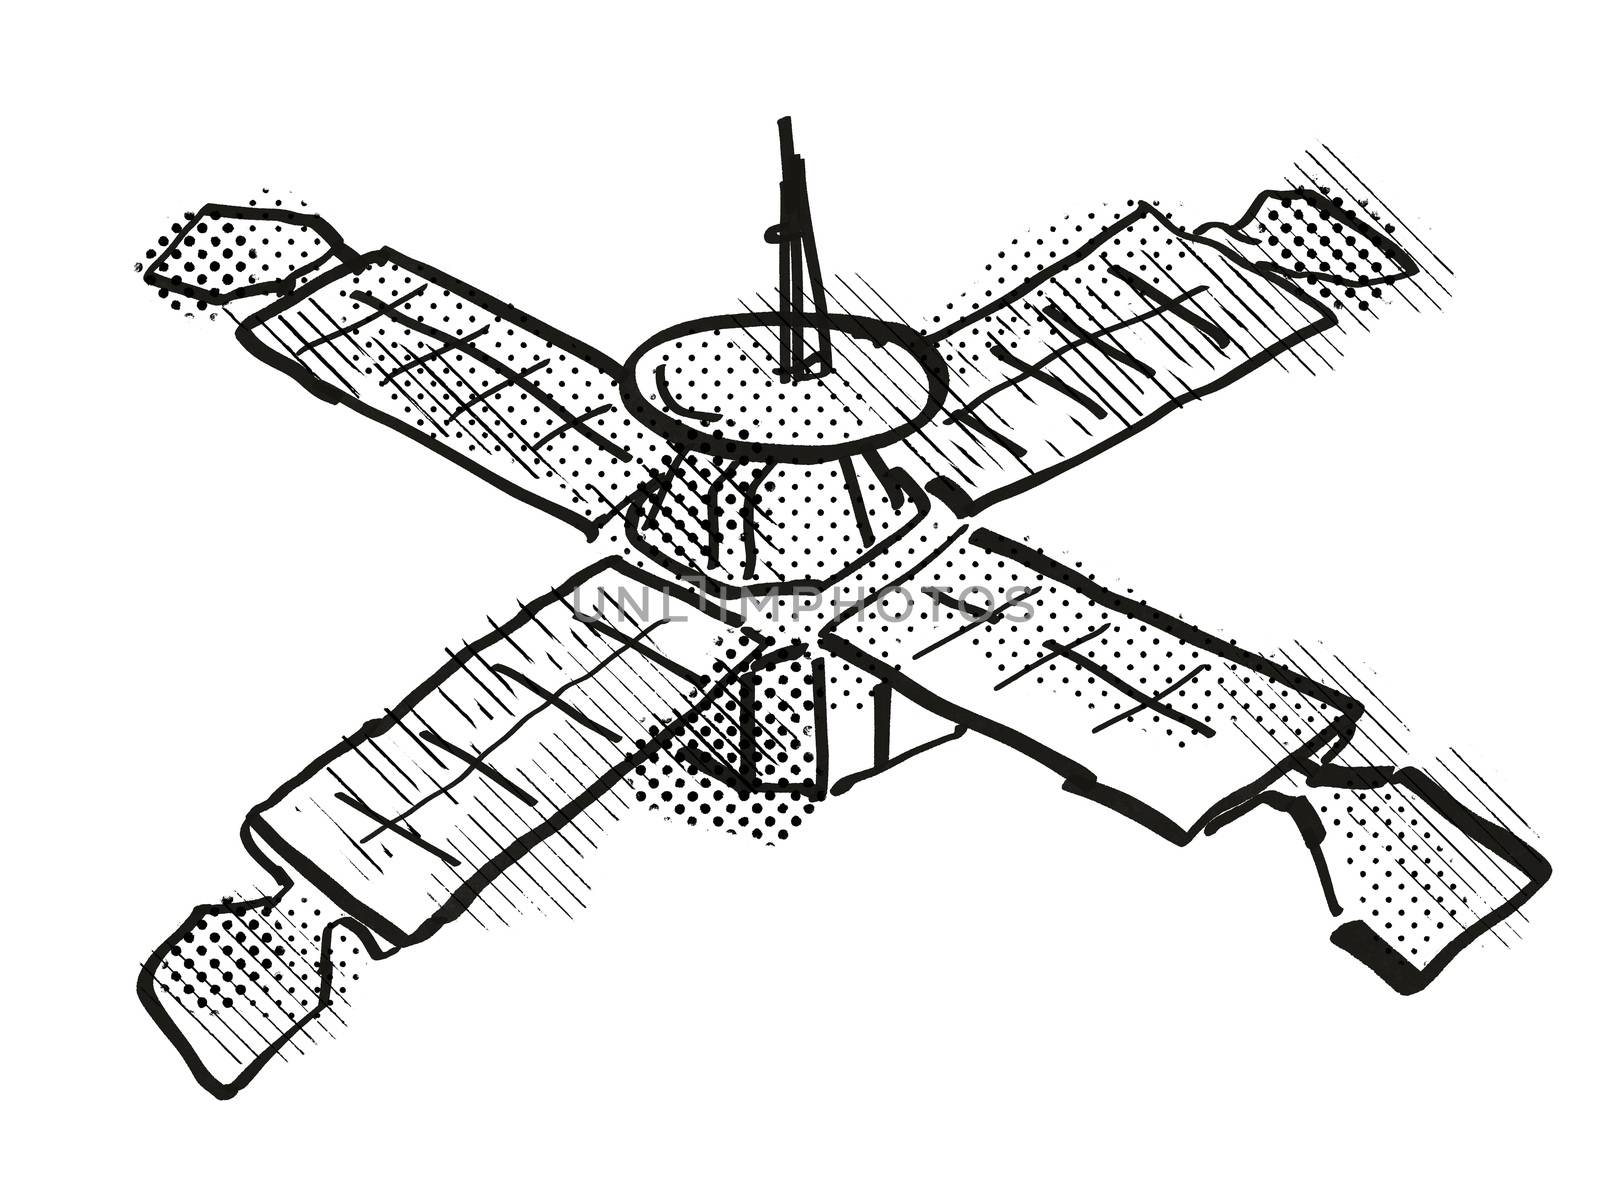 Retro cartoon style drawing of a vintage spaceprobe or space satellite on isolated white background done with half-tone dots in black and white.